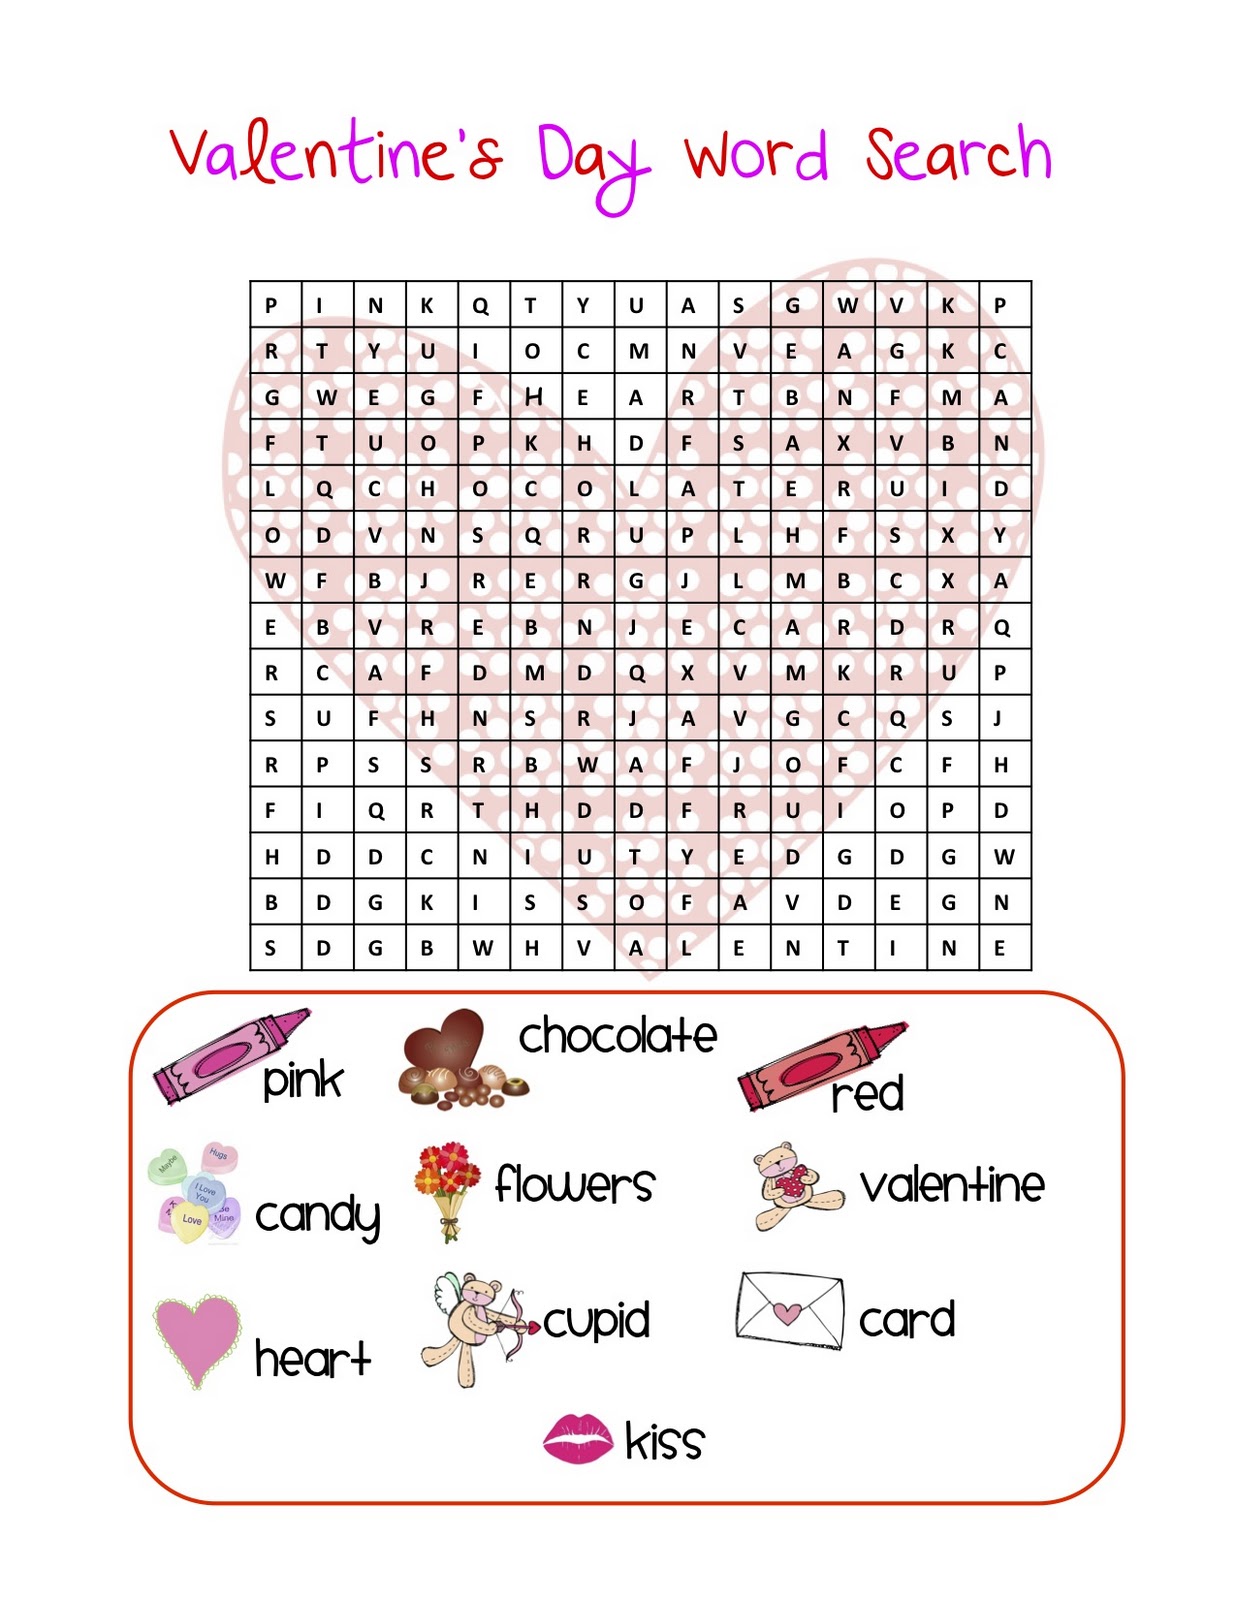 Classroom Freebies Valentine's Day Word Search!!!